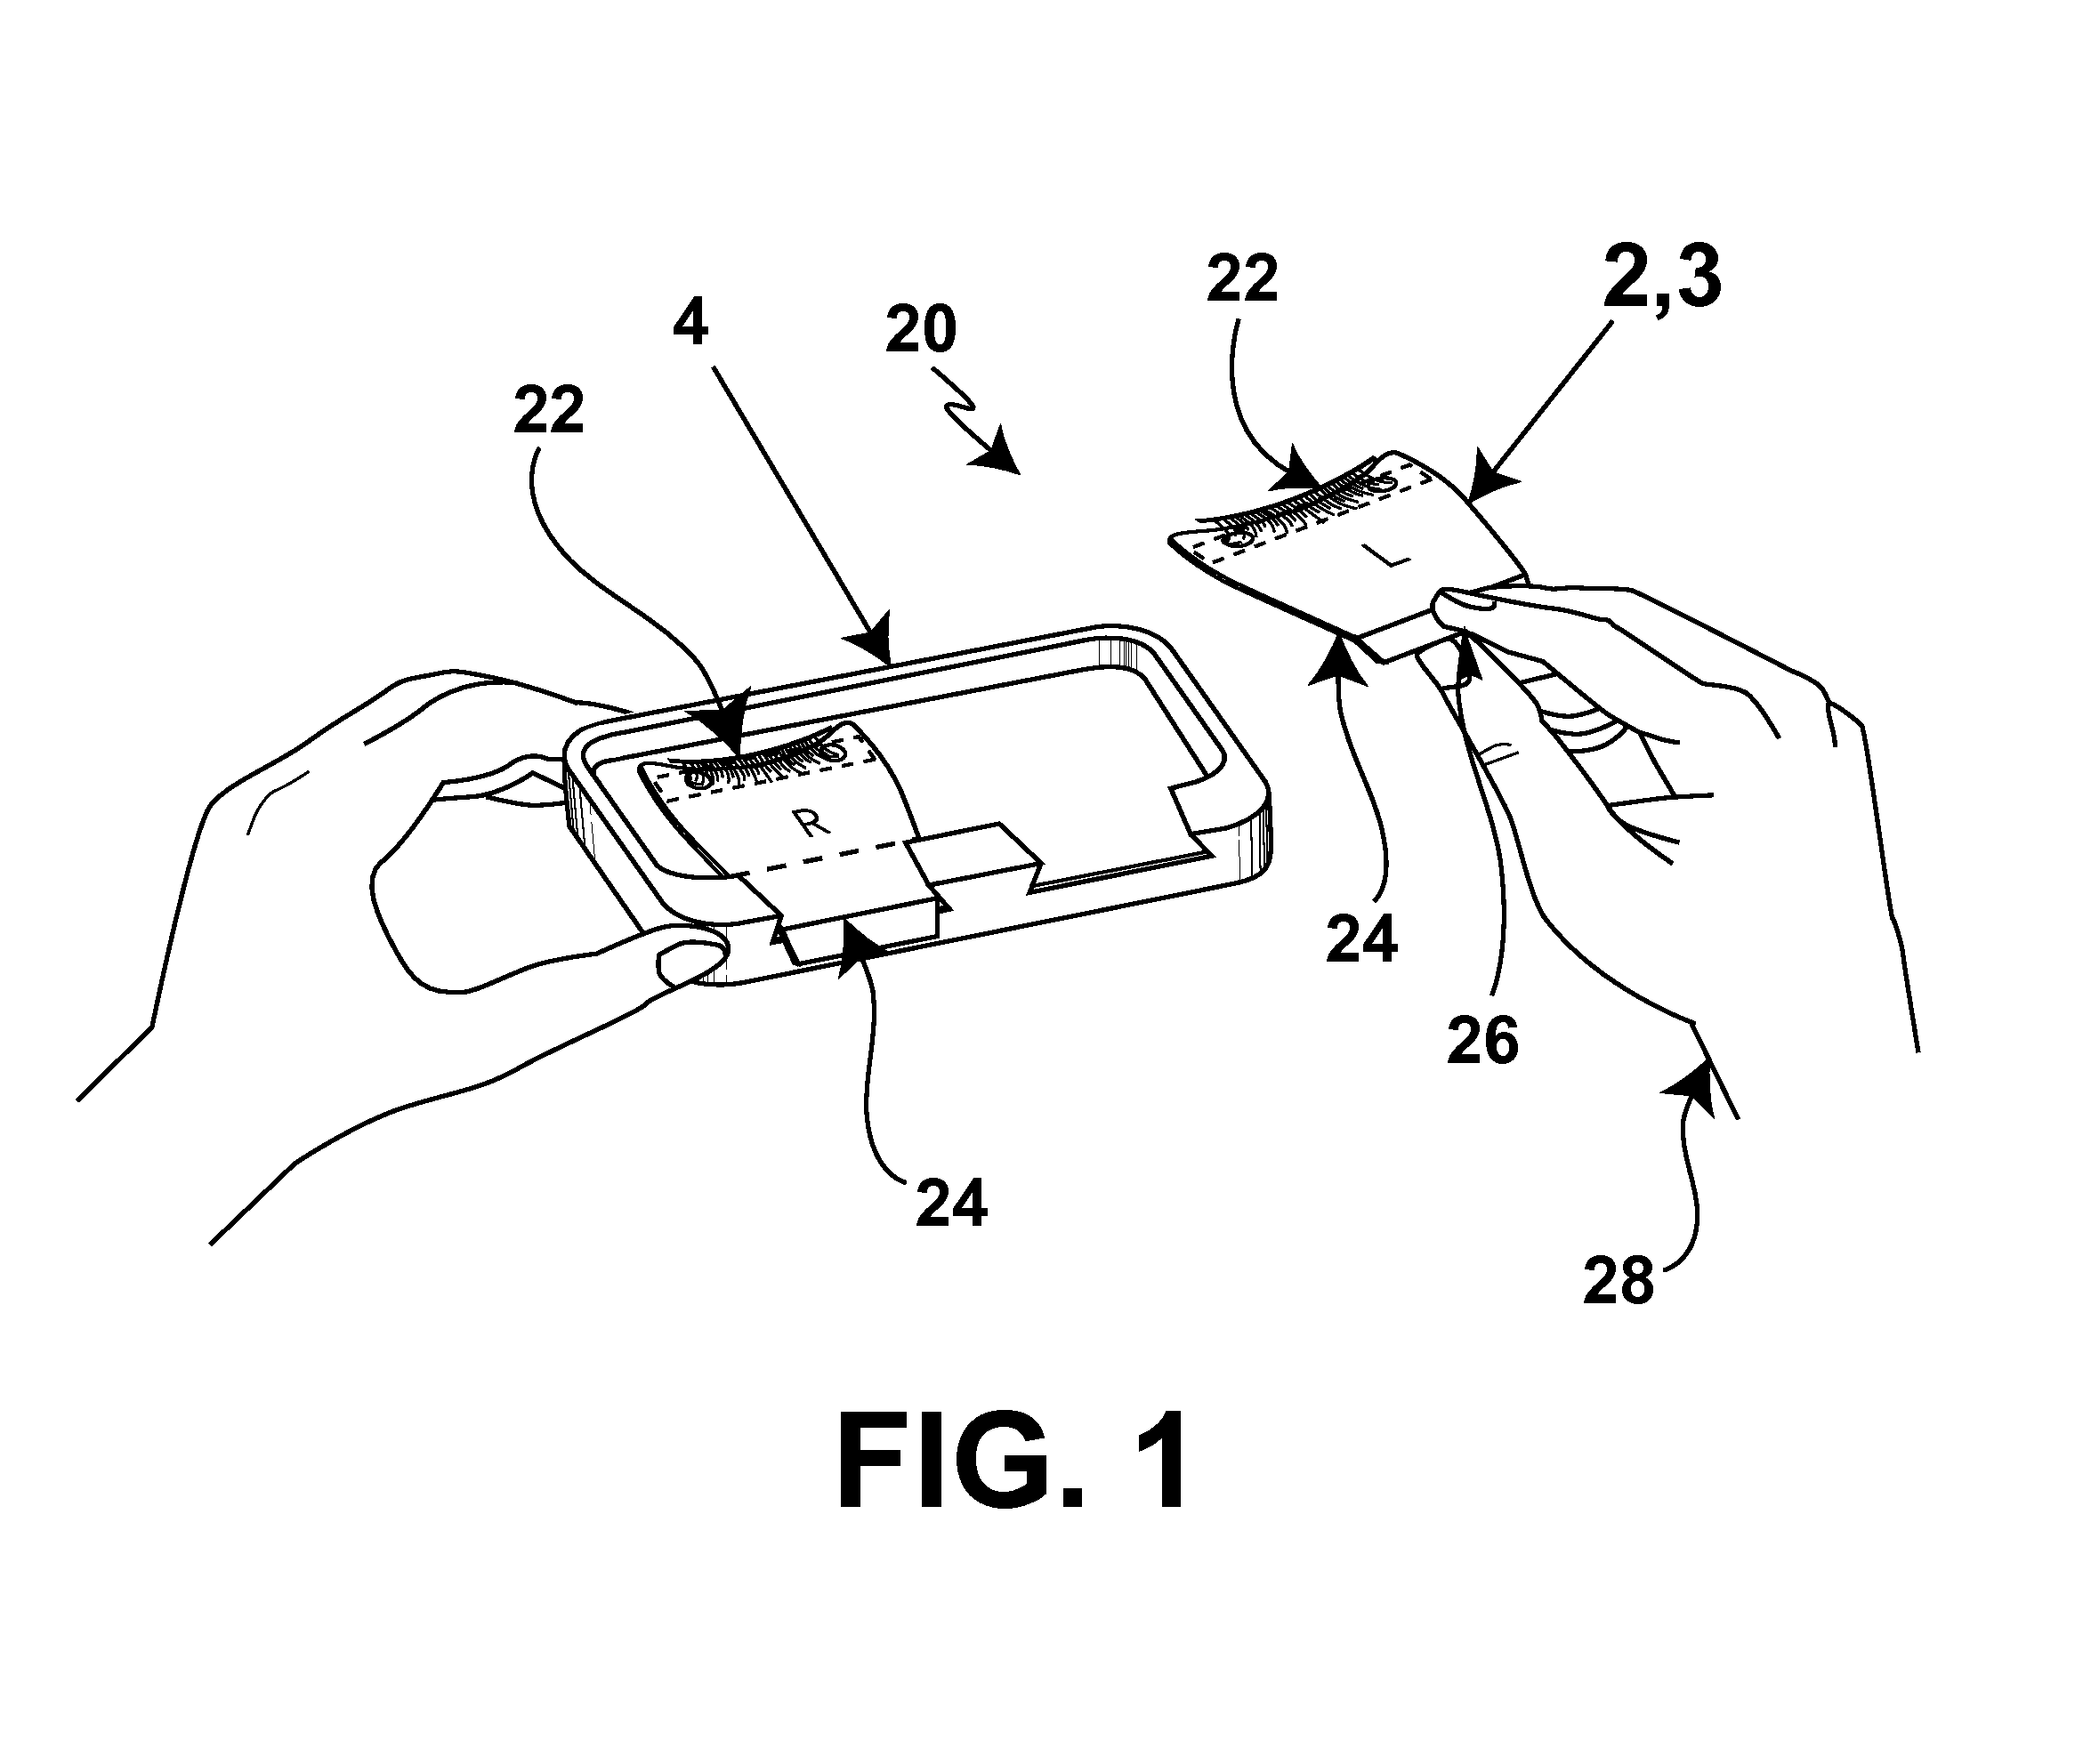 Combined tray and applicator for holding and facilitating application of false eyelashes